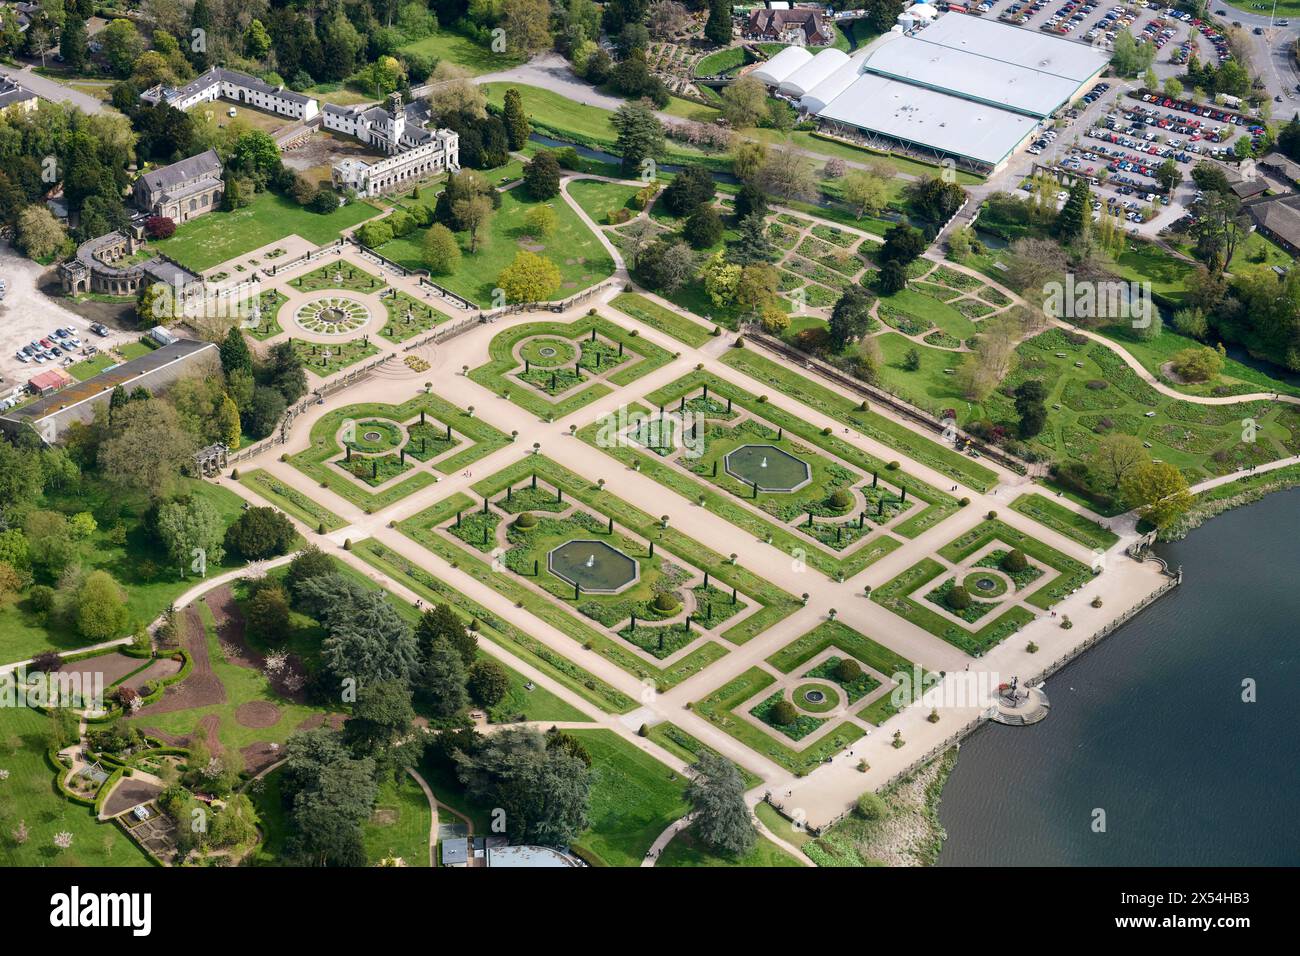 An aerial view of Trentham Gardens Stoke on Trent, north west England, UK Stock Photo